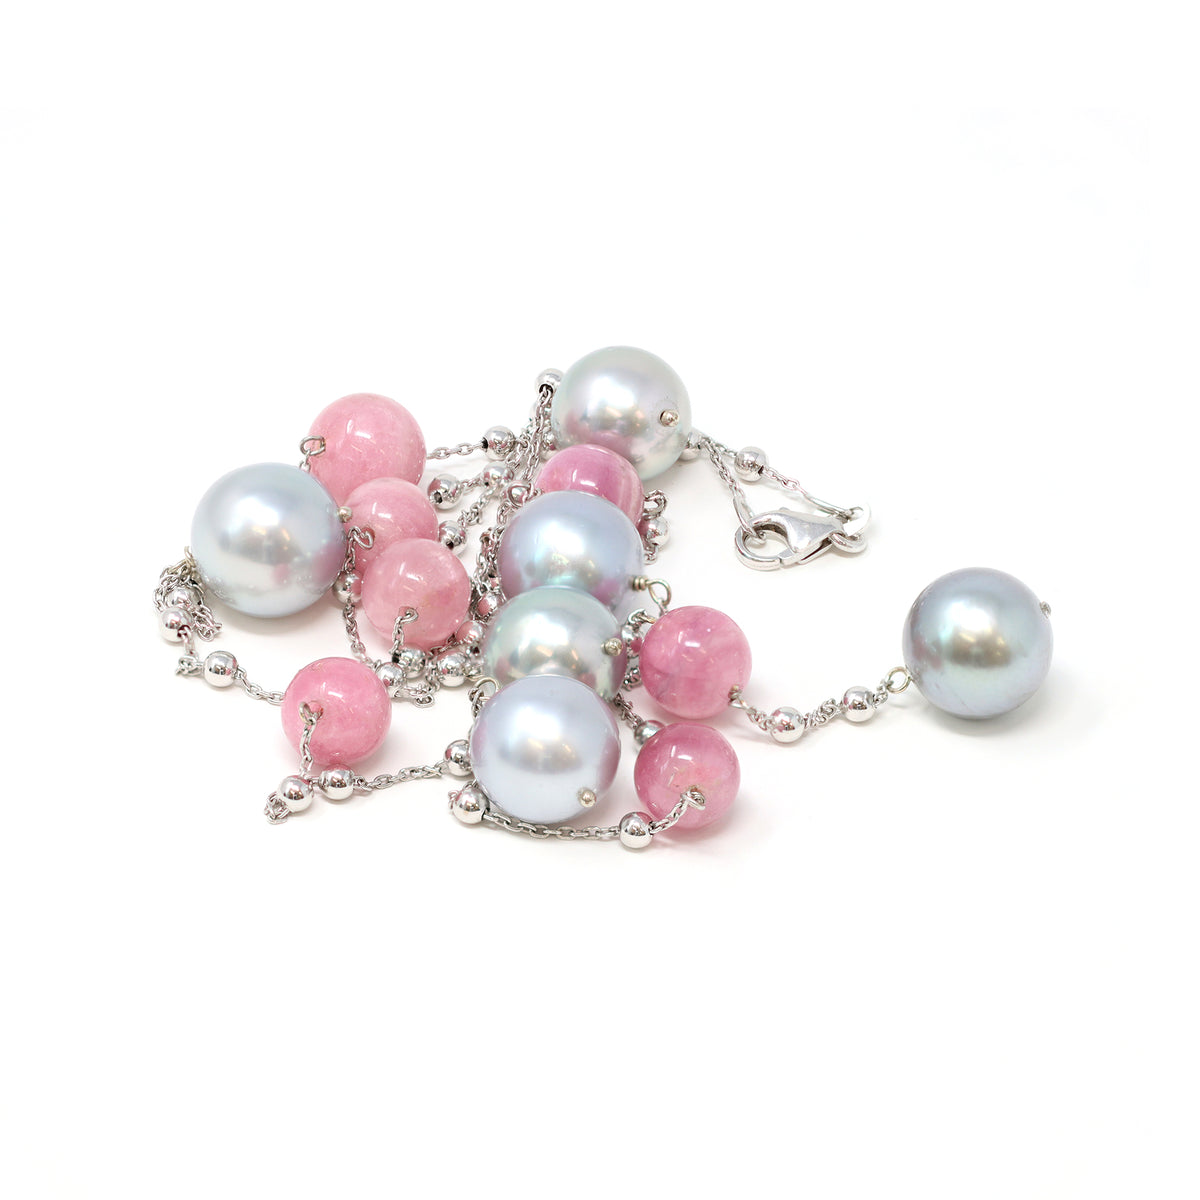 Tahitian Pearl and Pink Tourmaline Bead Station Necklace in 18k by Rosaria Varra random view